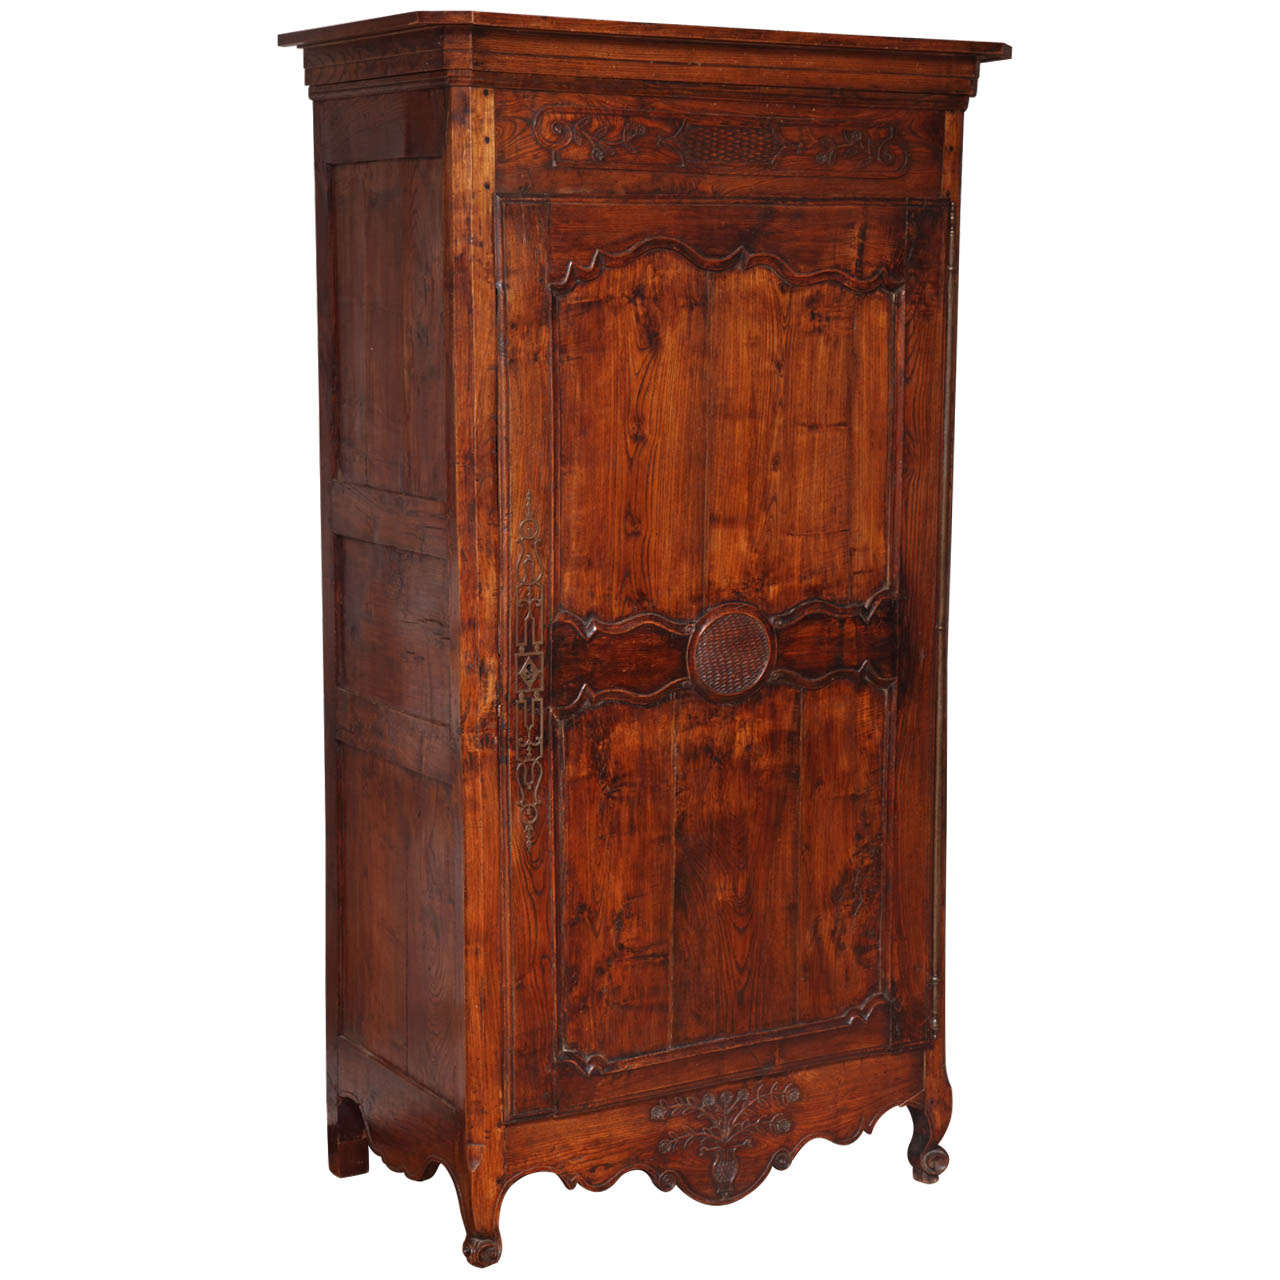 A Louis XV Style Carved and Stained Walnut Single Door Armoire